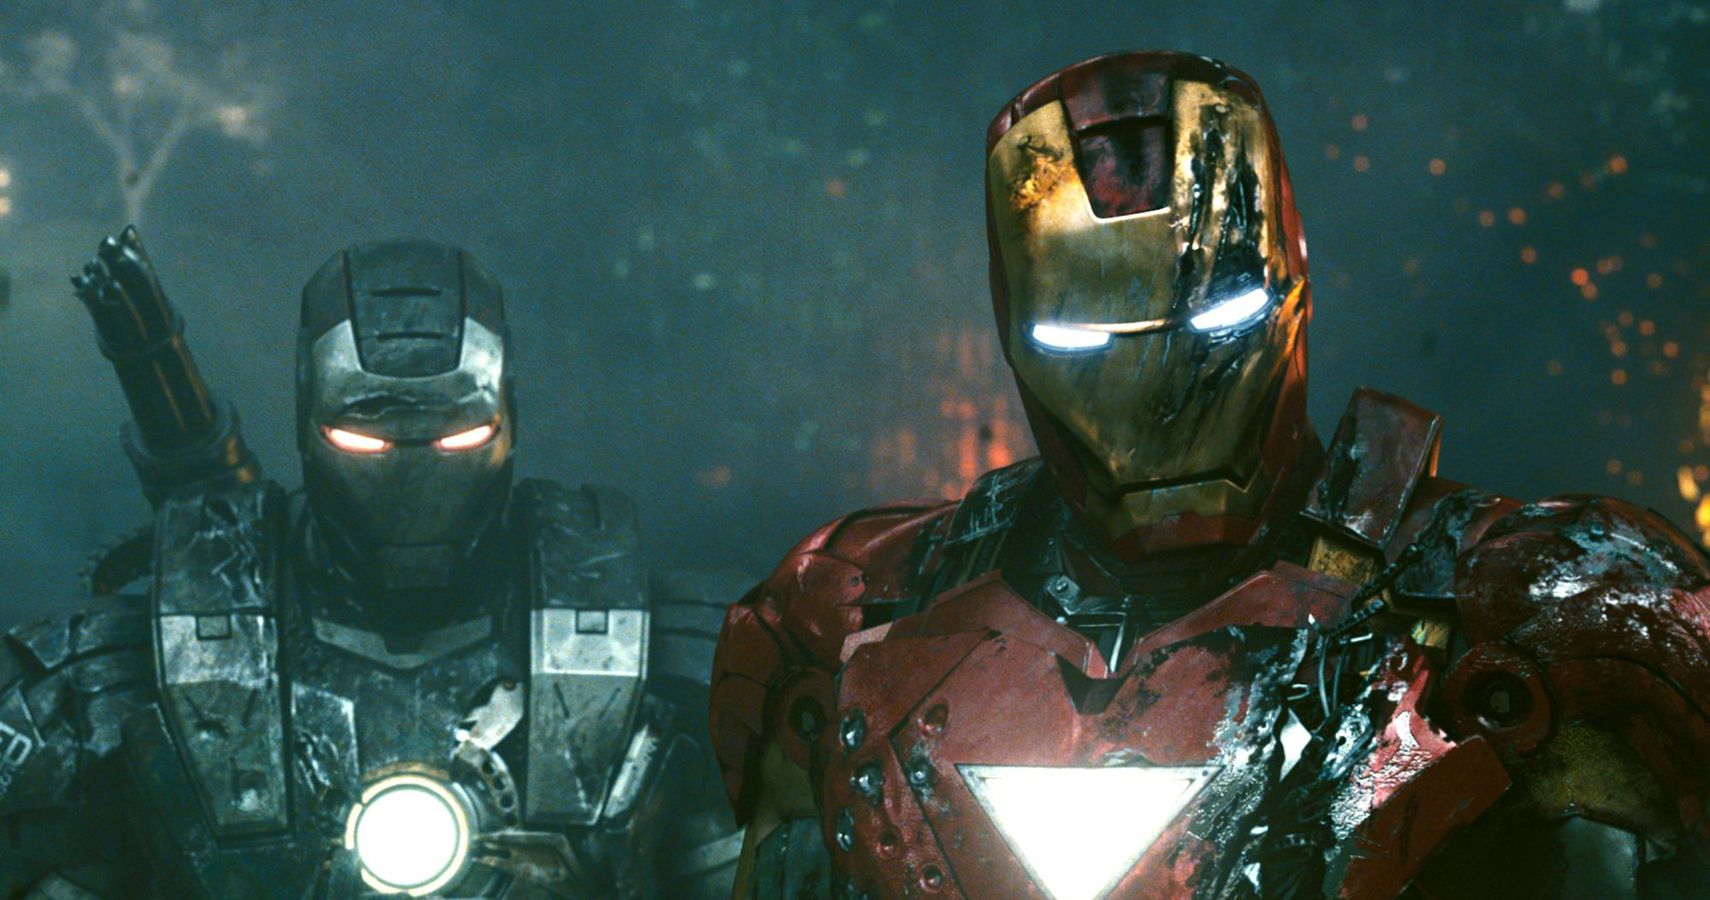 At Long Last, We're Finally Getting An 'Iron Man' Video Game